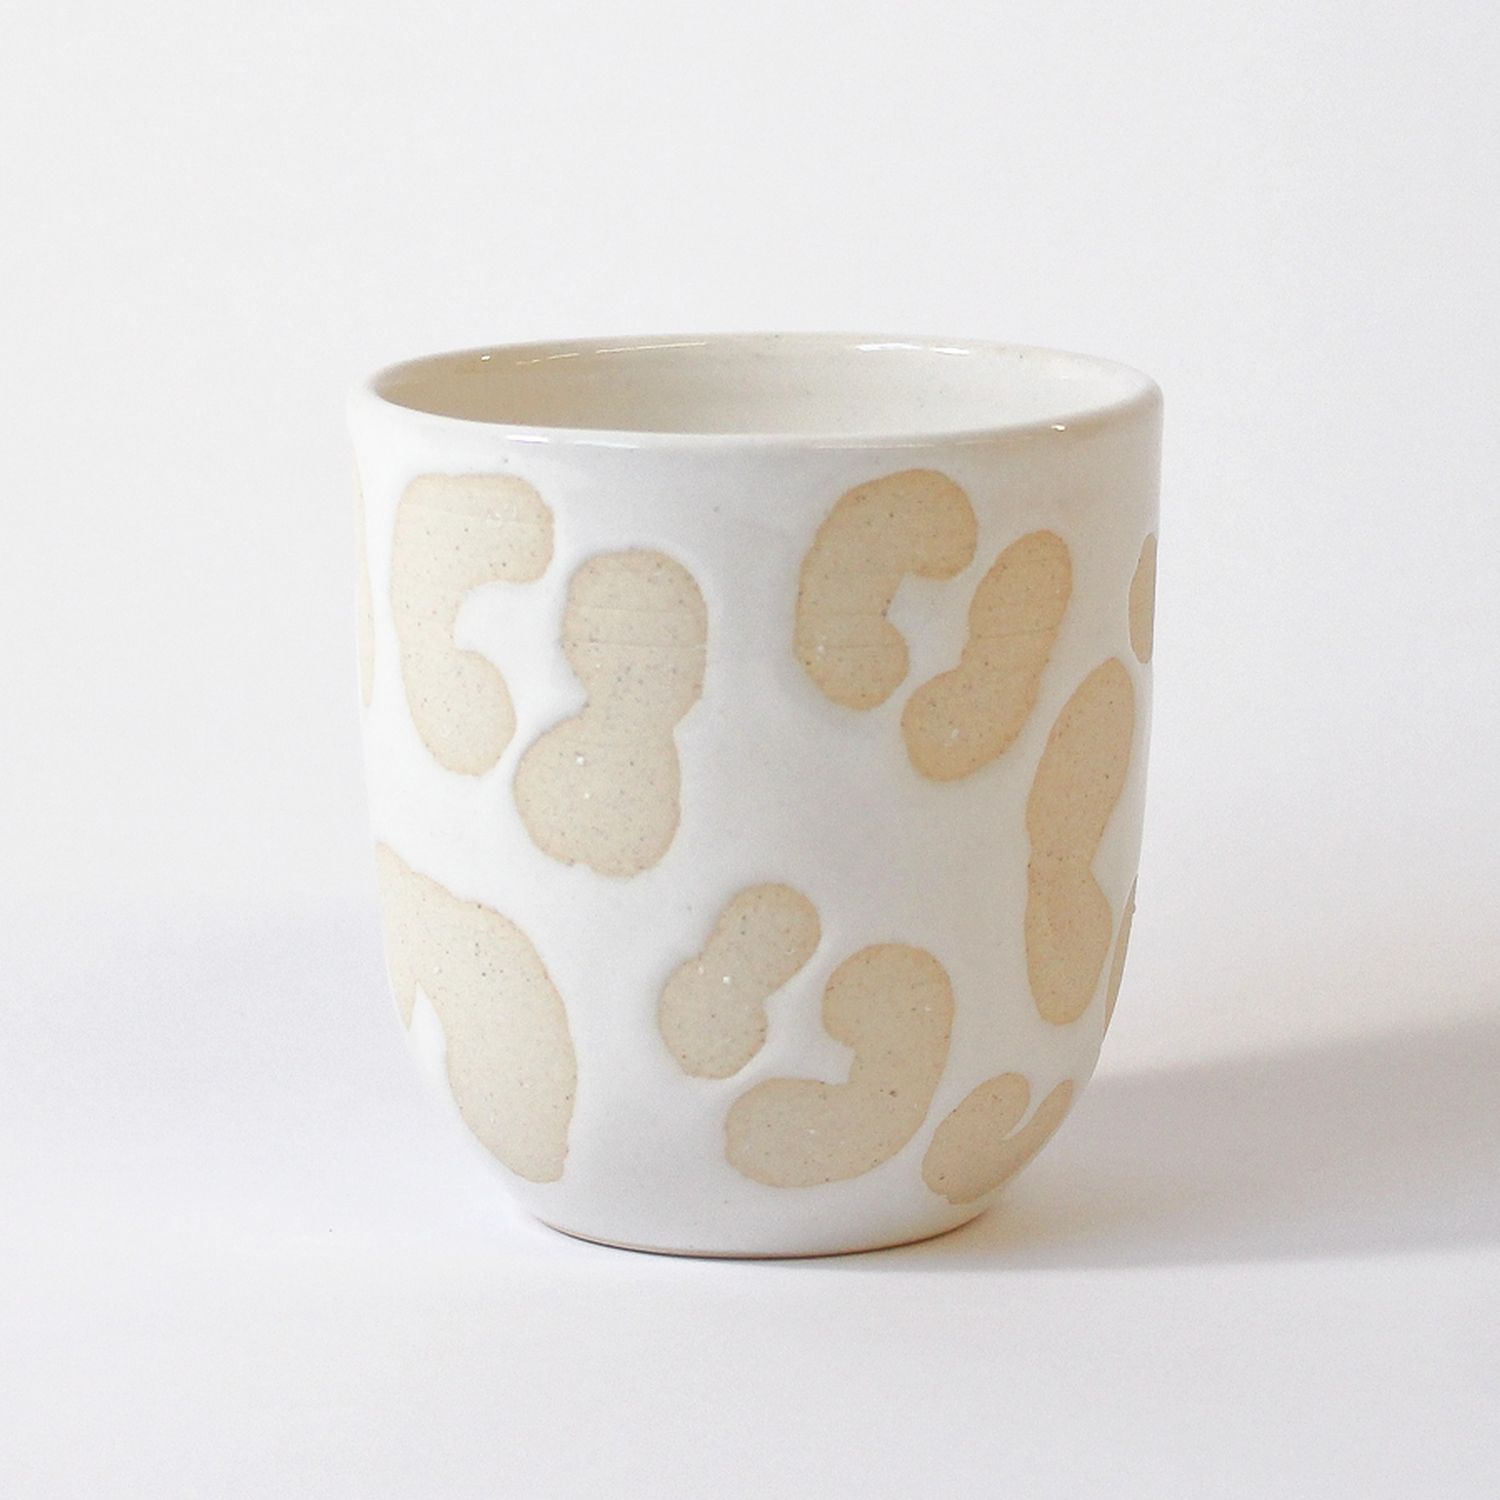 Mima Ceramics: Small Cup White Product Image 1 of 1